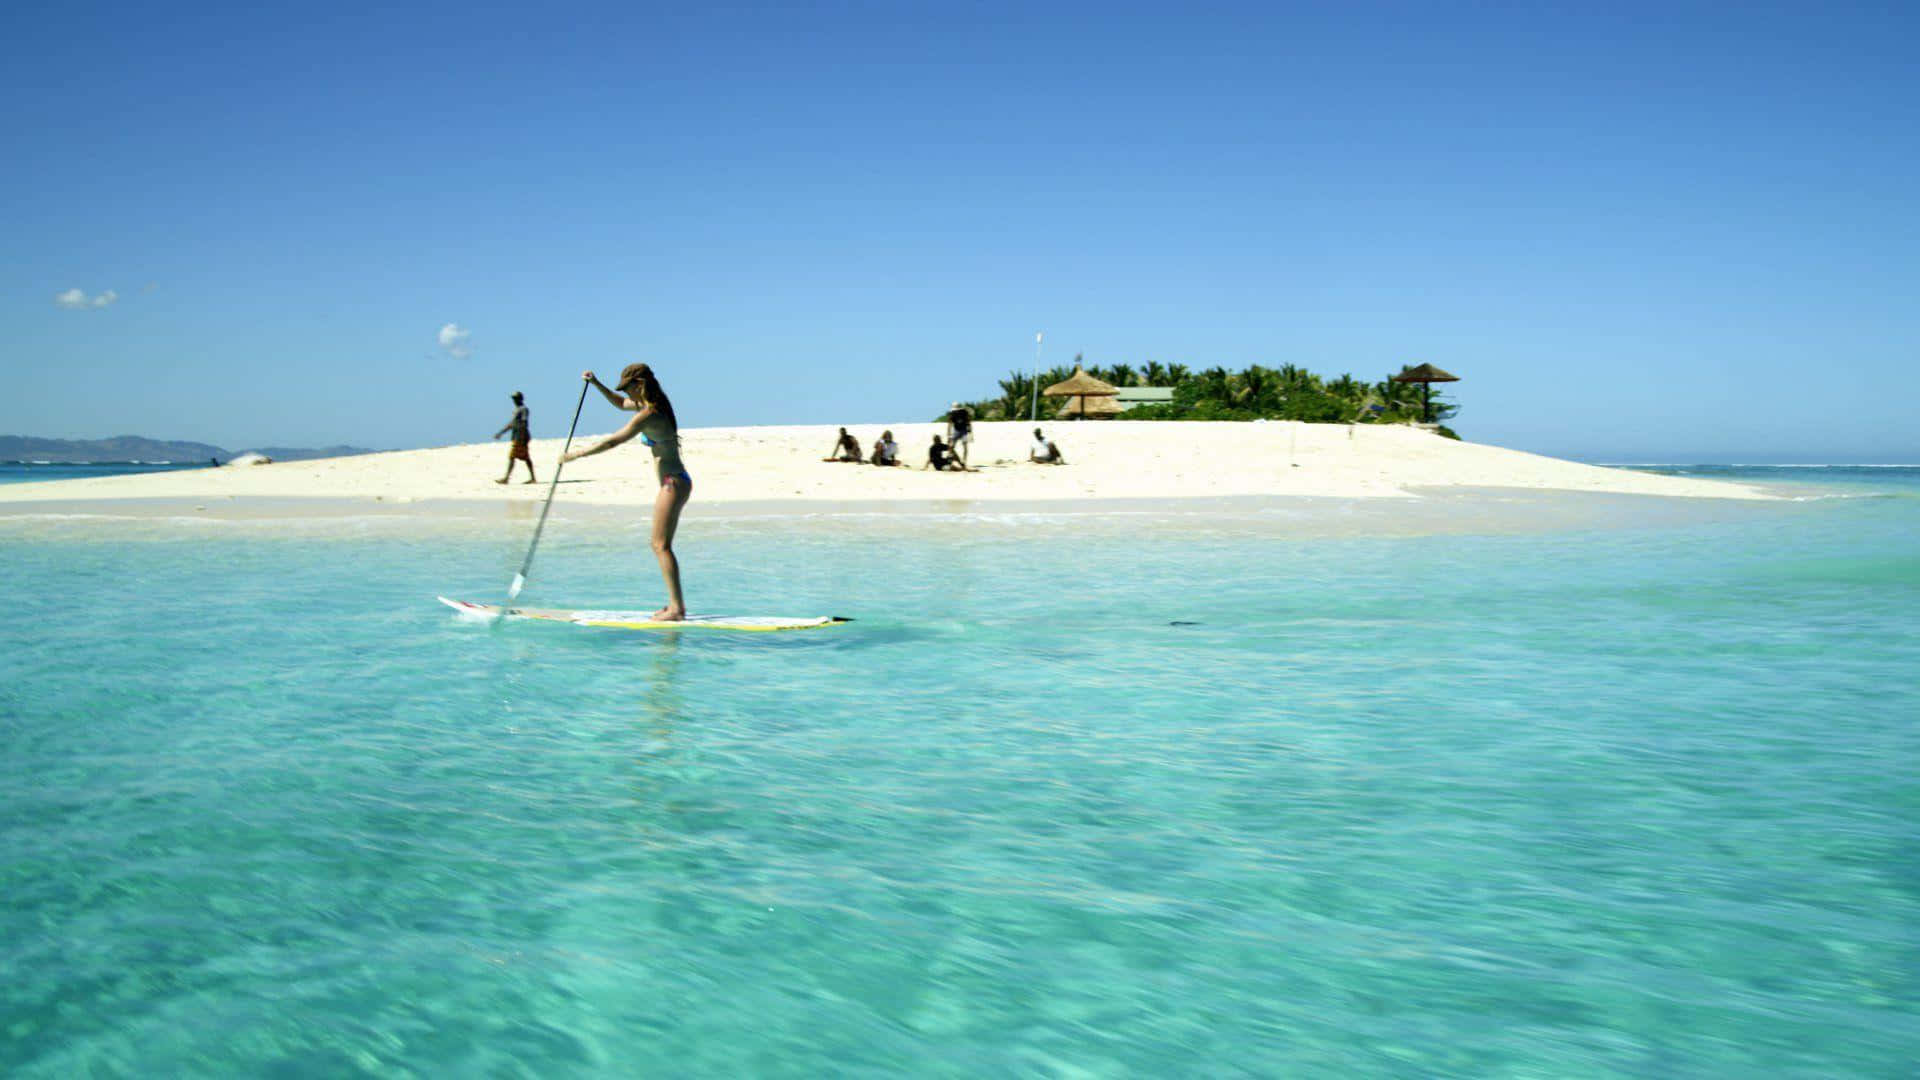 Paddleboarding on a beautiful sunny day Wallpaper